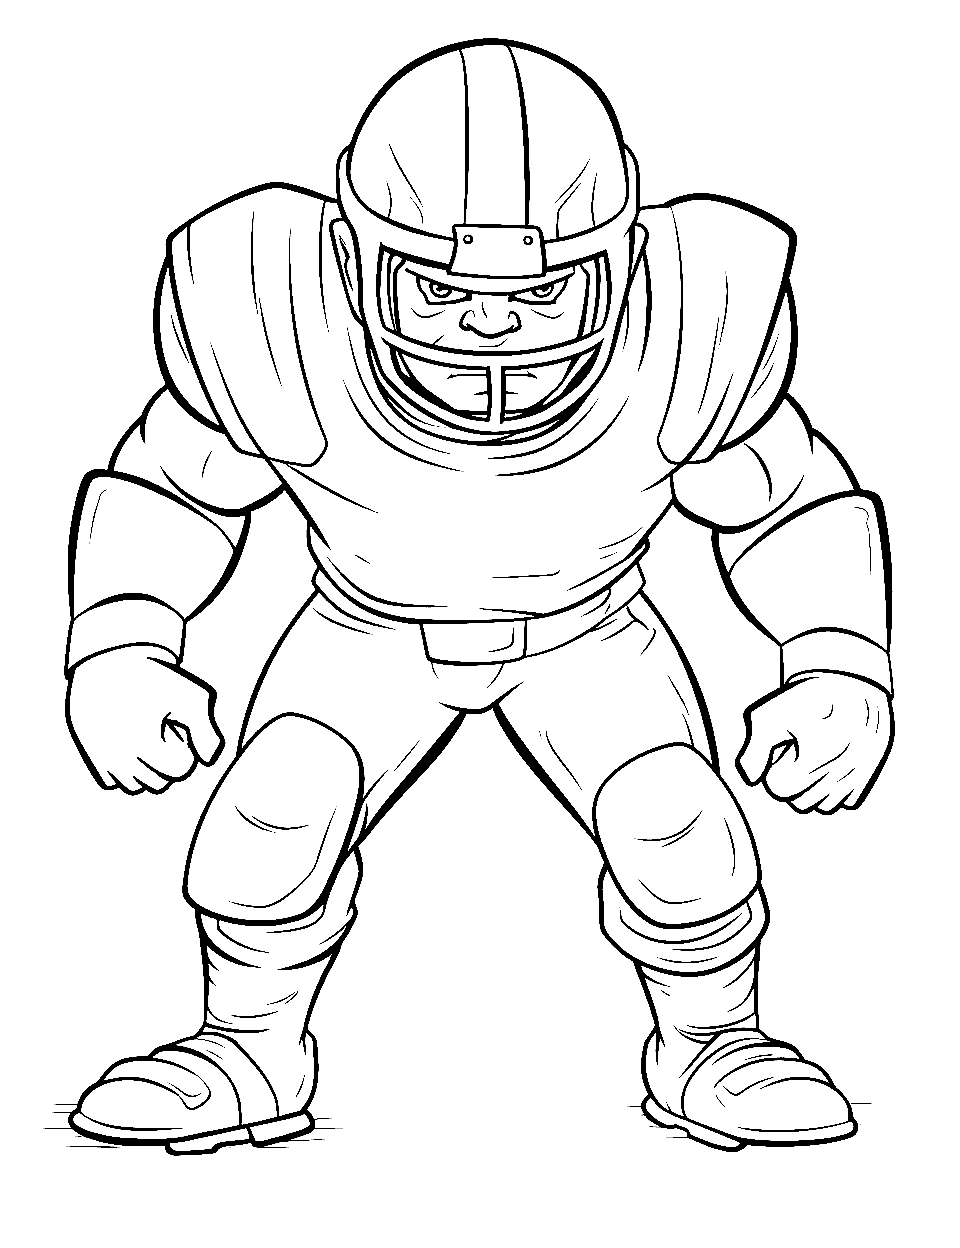 Focused Linebacker Coloring Page - A linebacker in a stance, focused on the offensive line.